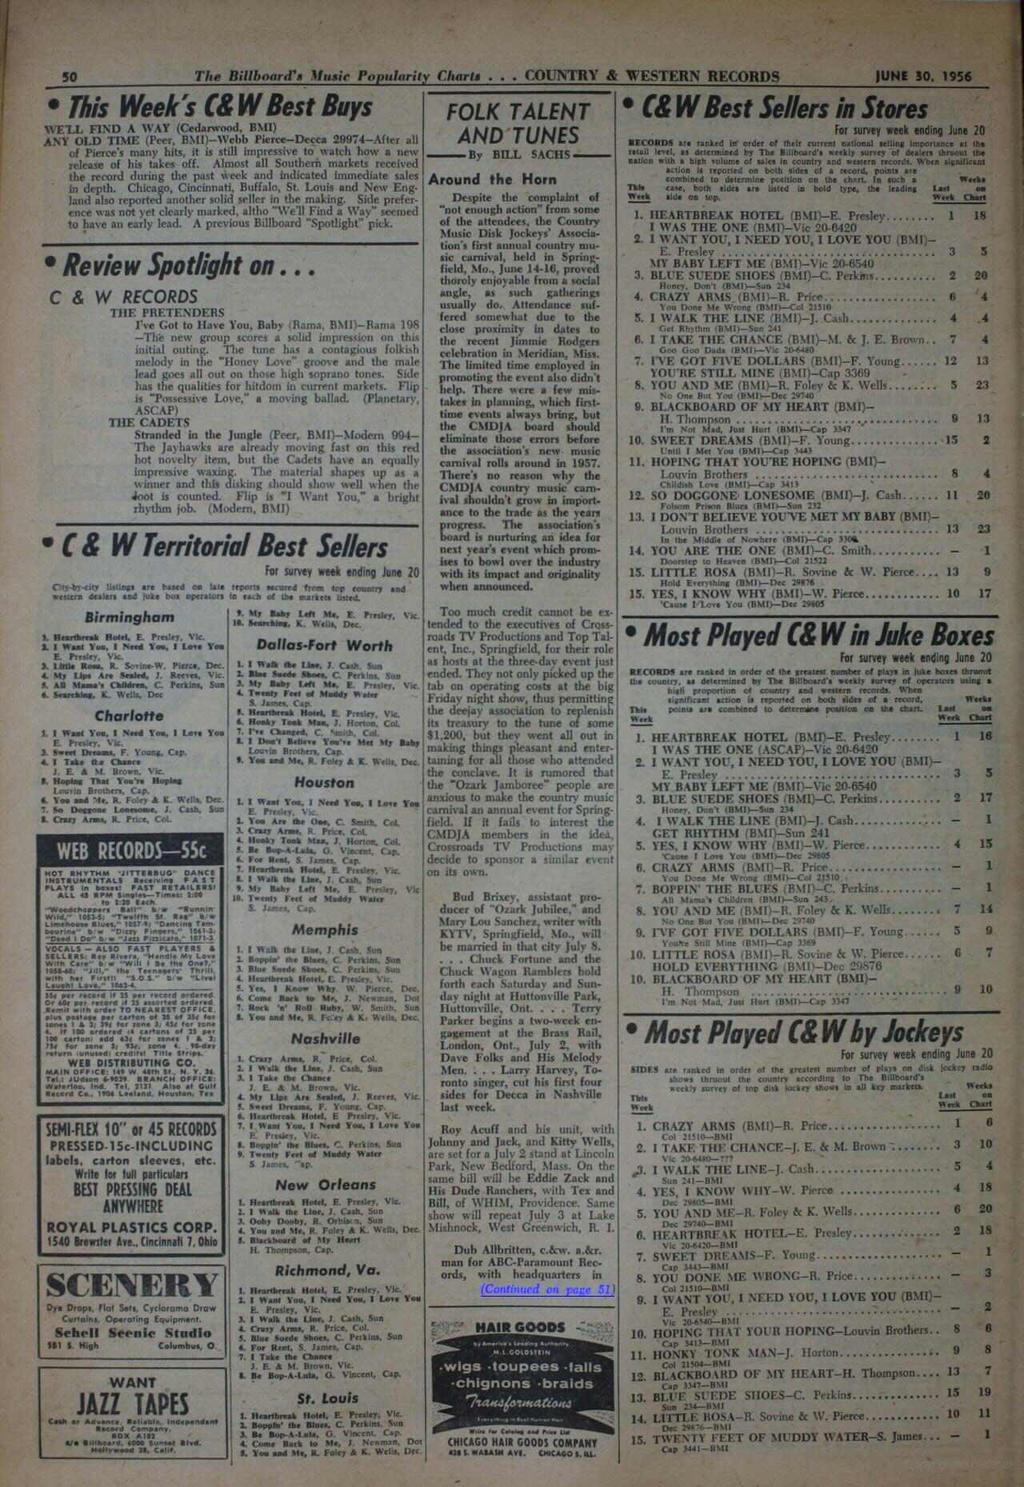 50 The Billboard's lfusir Popularity Charts COUNTRY & WESTERN RECORDS JUNE 30, 956 This Week's (& W Best Buys WE'LL FND A WAY (Cedarwood, BM) ANT OLD TME (Peer, BM) -Webb Pierce -Decca 29974 -After